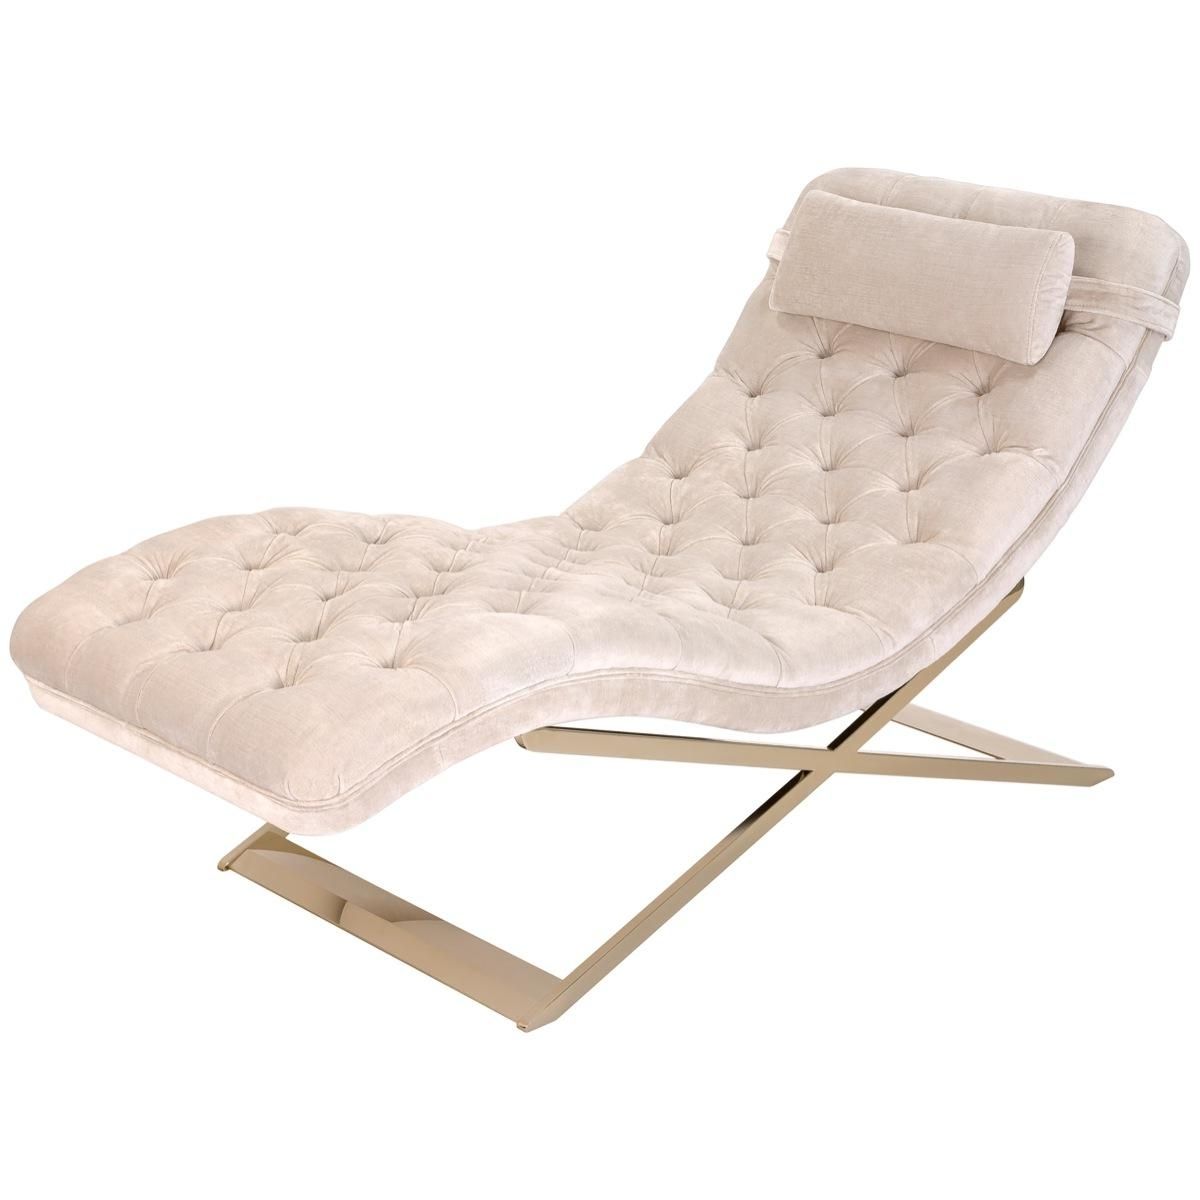 White Chaise Lounge Chairs Within Widely Used Nampa Upholstered Chaise Lounge Chair – Safavieh Couture (View 6 of 15)